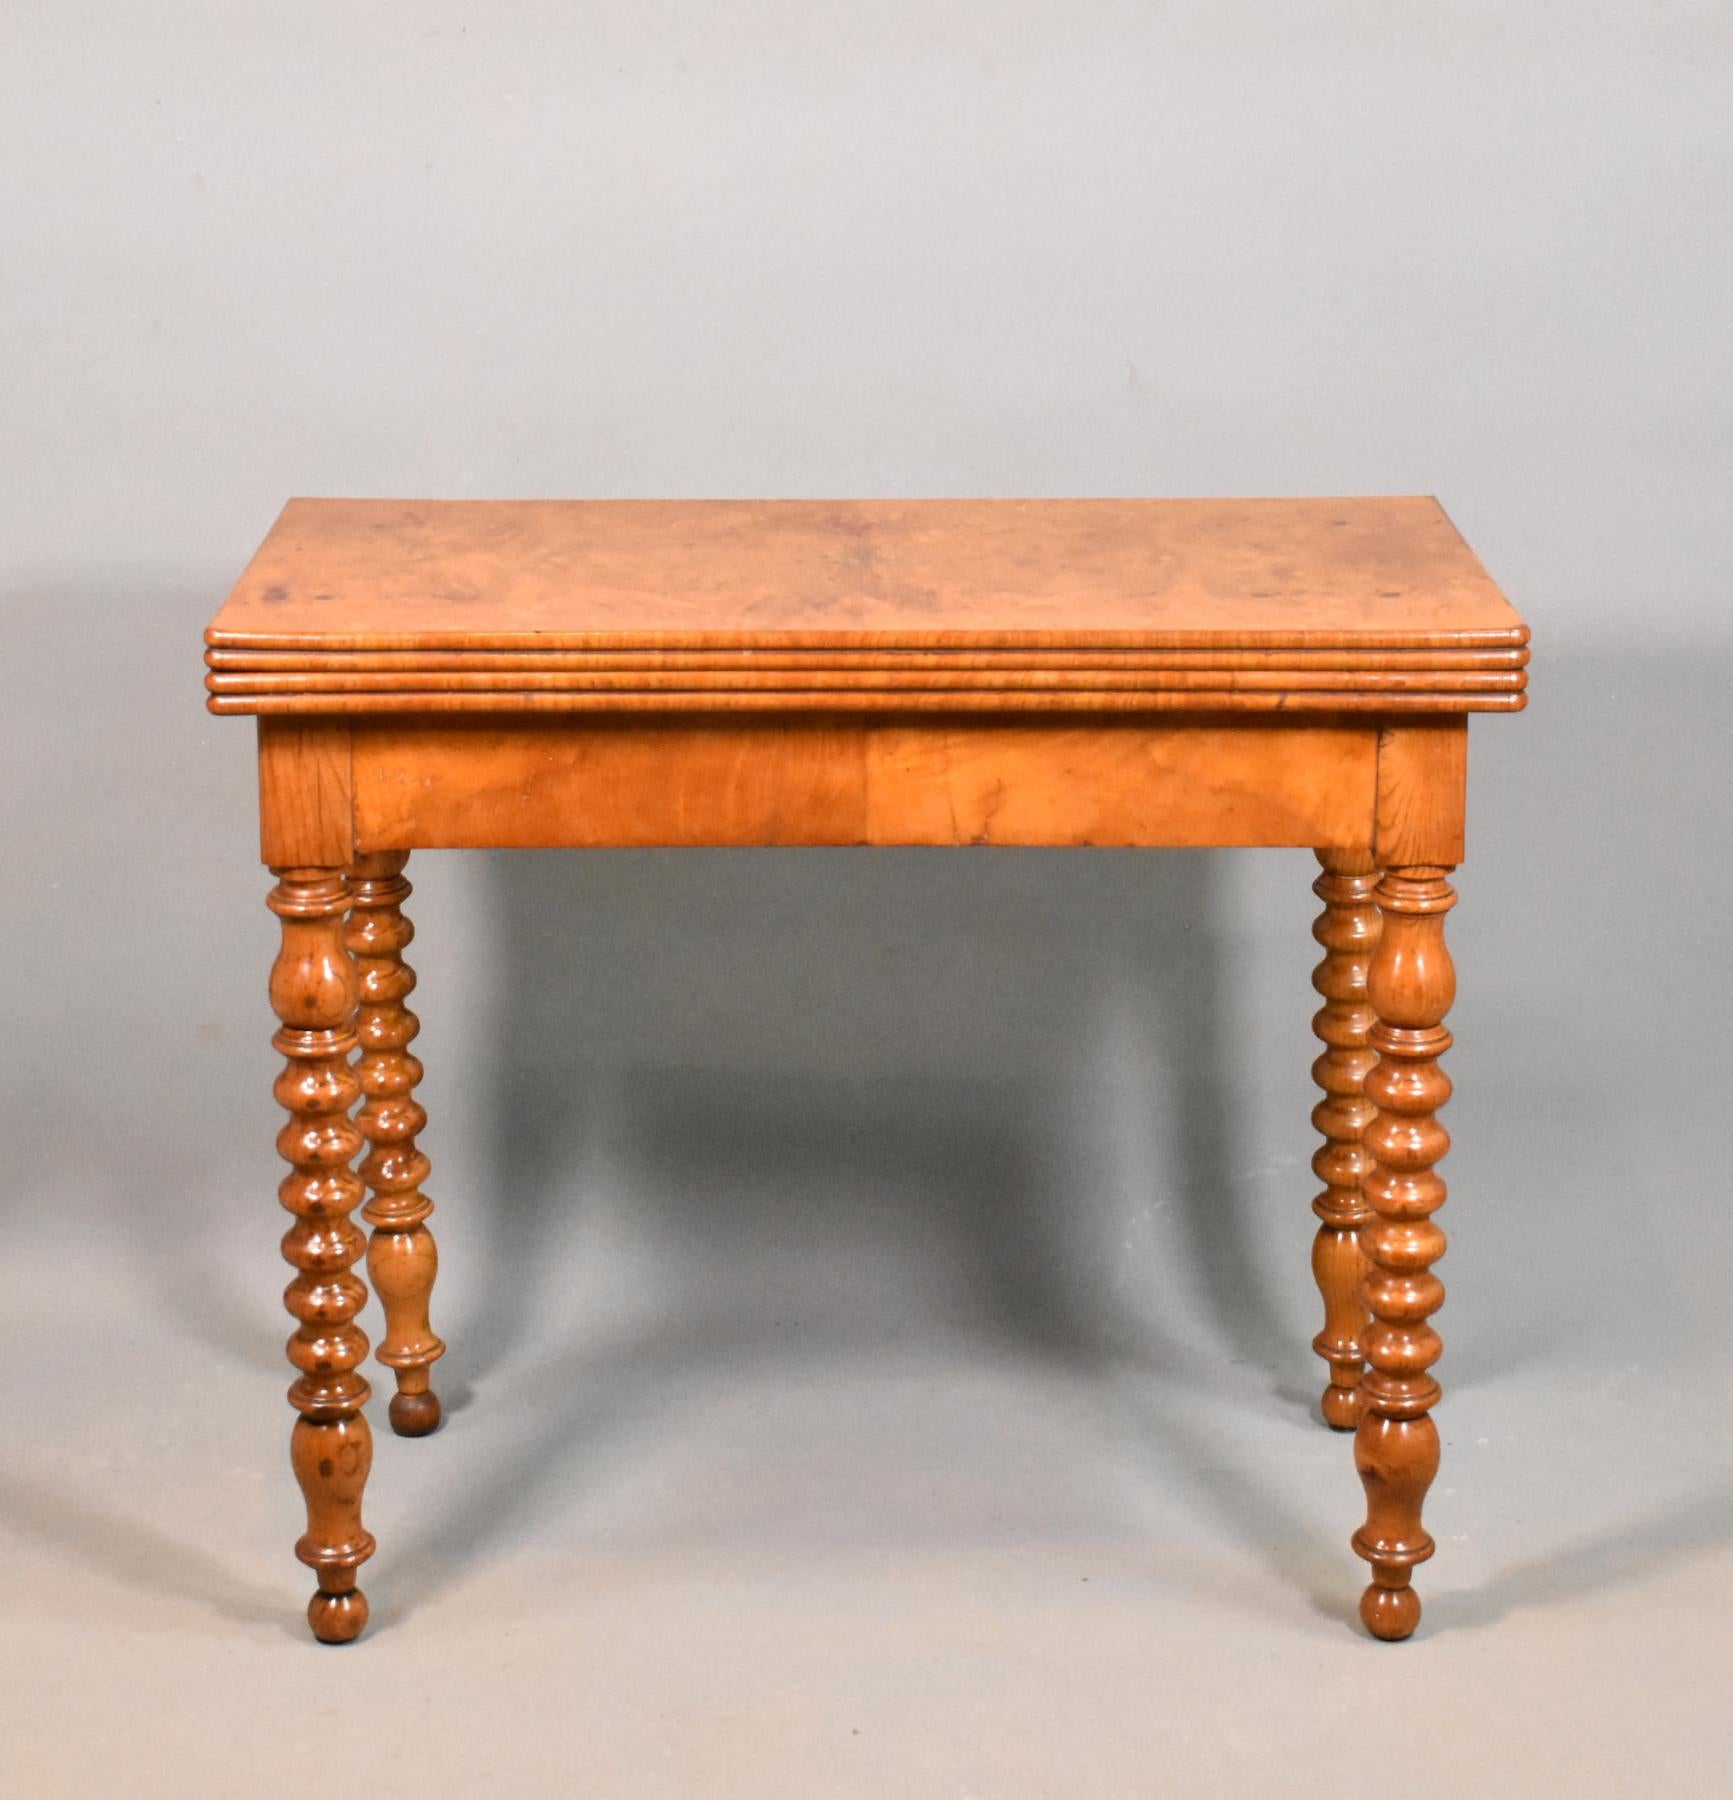 Antique French burr elm folding games table 19th century. 

This beautifully figured burr elm games table features quarter-matched burr elm veneer panels to the top and underside playing surface. 

It has a beaded moulded outer edge with a